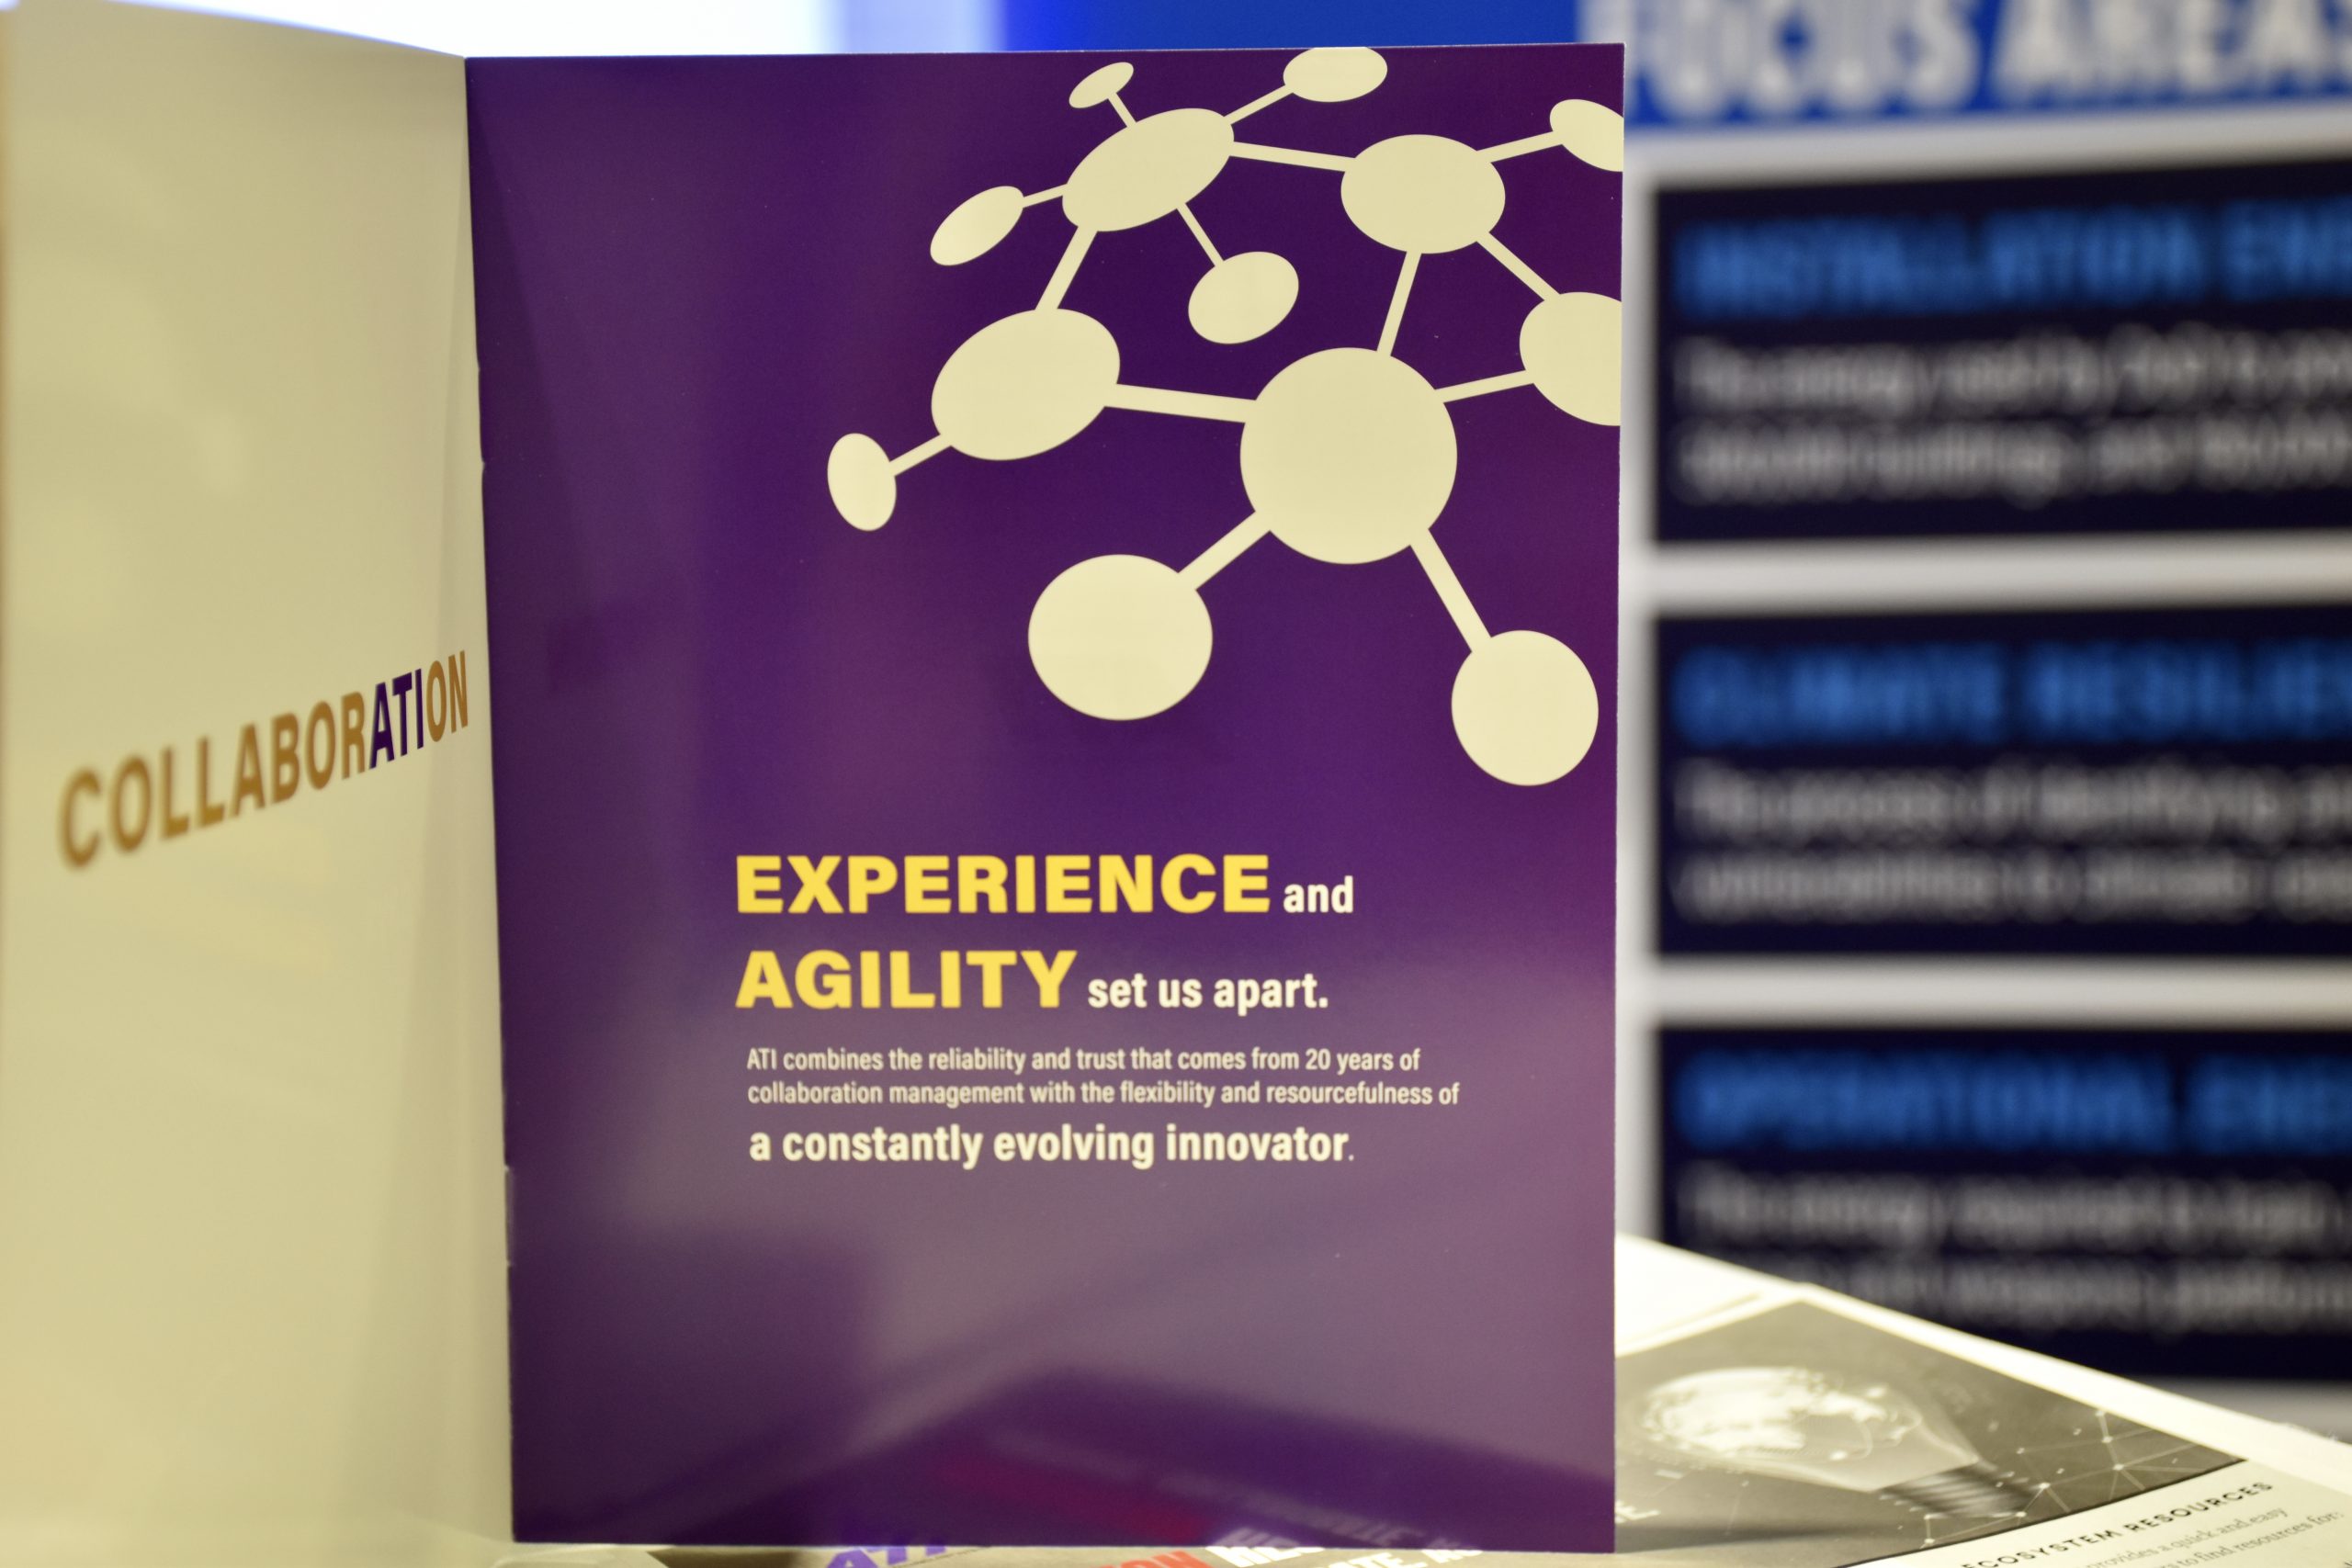 ATI: Experience & Agility set us apart. ATI combines the reliability & trust that comes from 20 years of collaboration management with the flexibility & resourcefulness of a constantly evolving innovator.